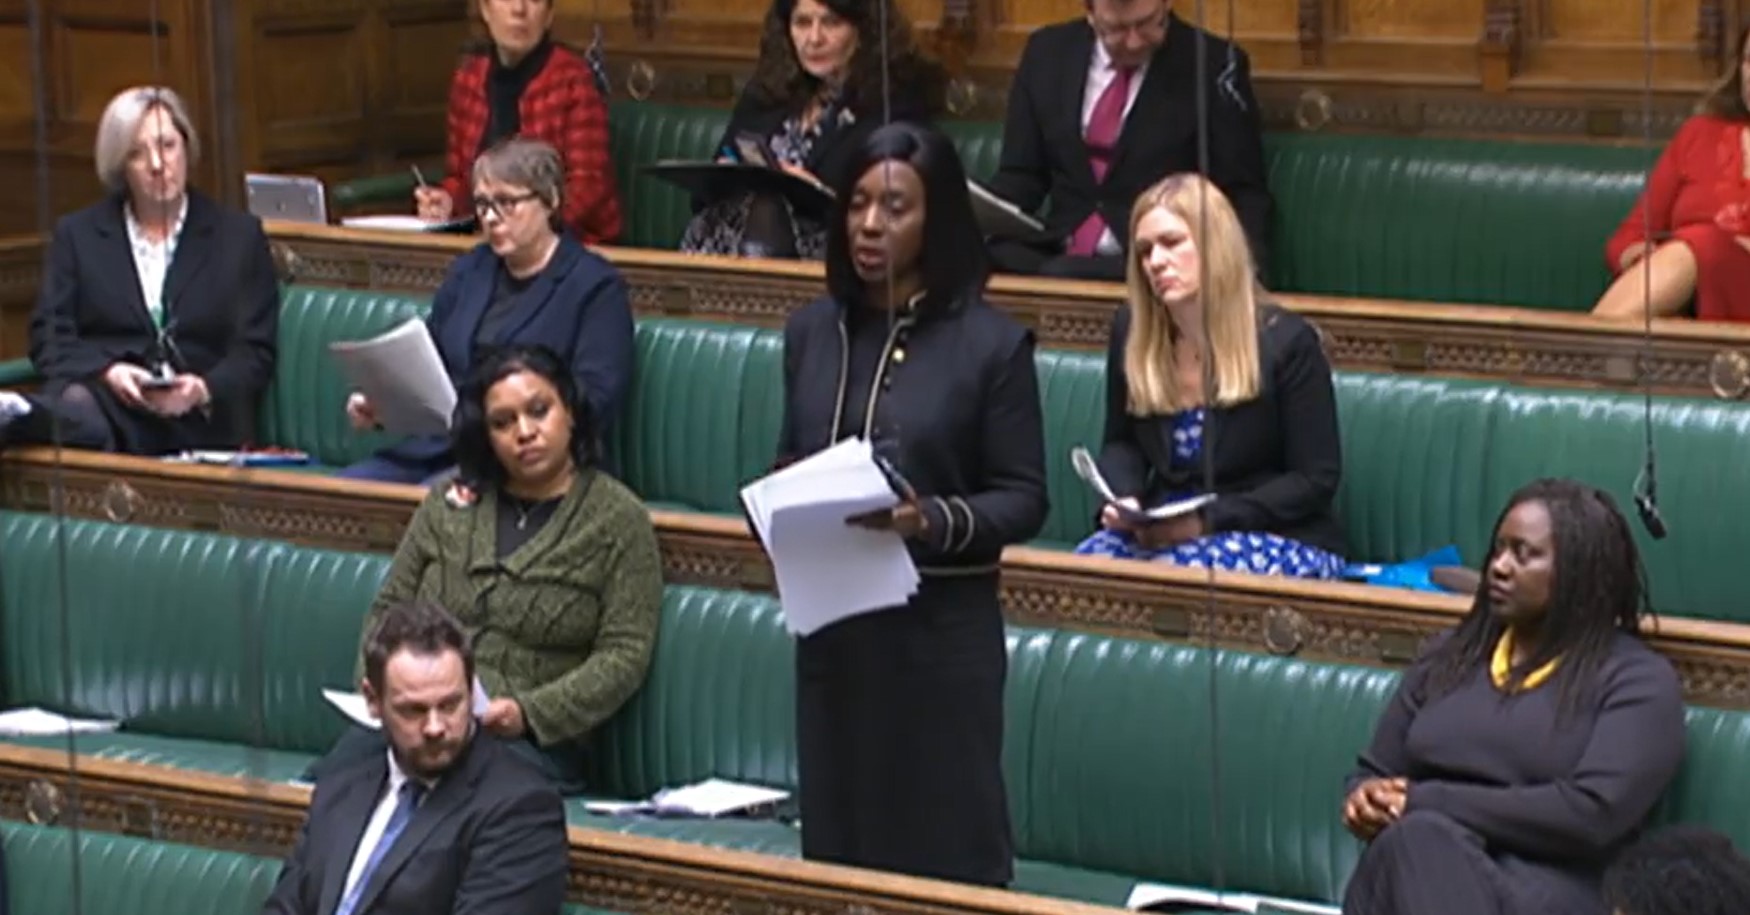 Labour MP Florence Eshalomi speaking in the Commons